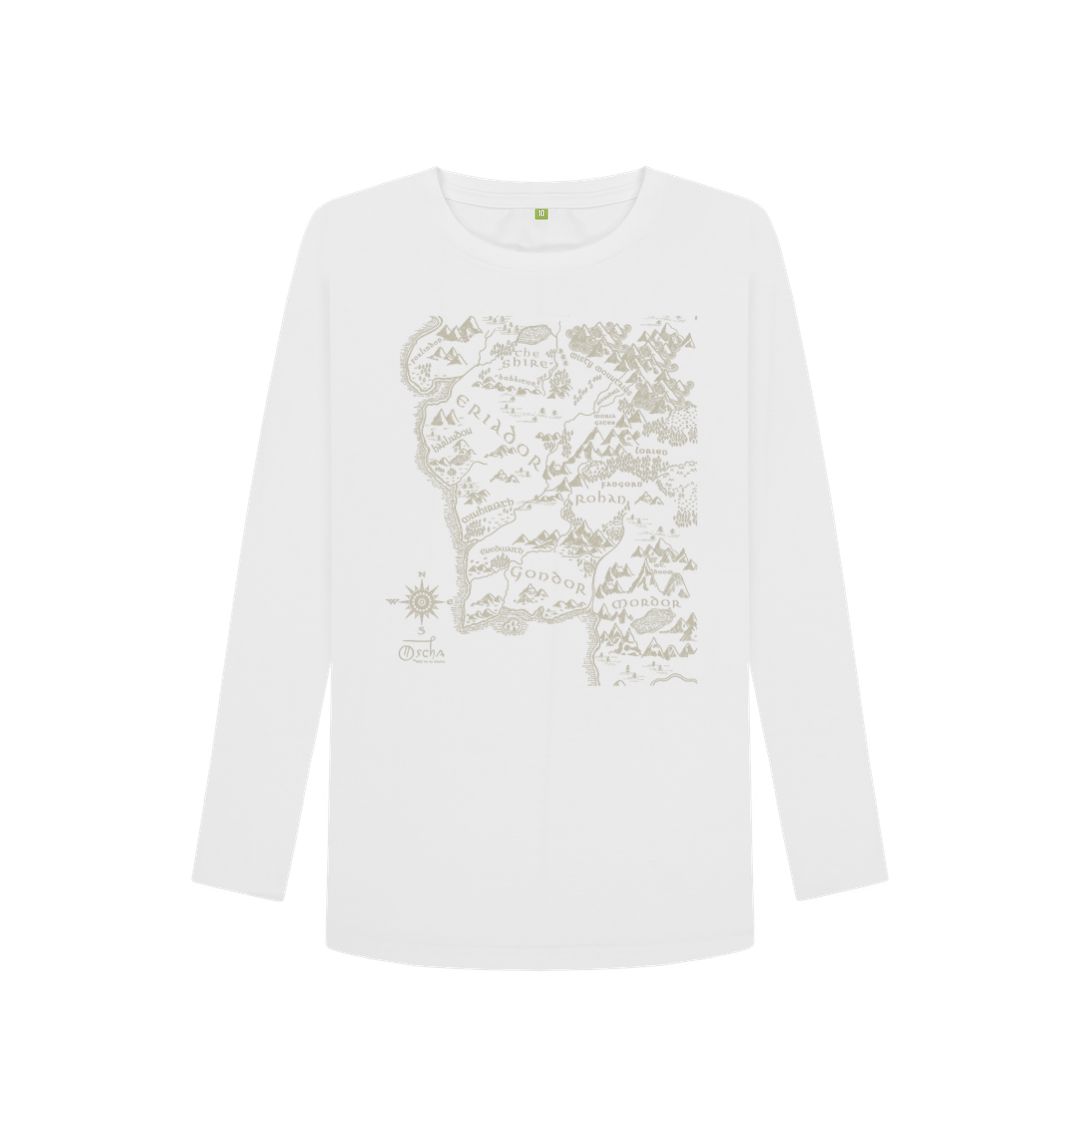 White Realm of MIDDLE-EARTH\u2122 Women's Long Sleeved T-Shirt